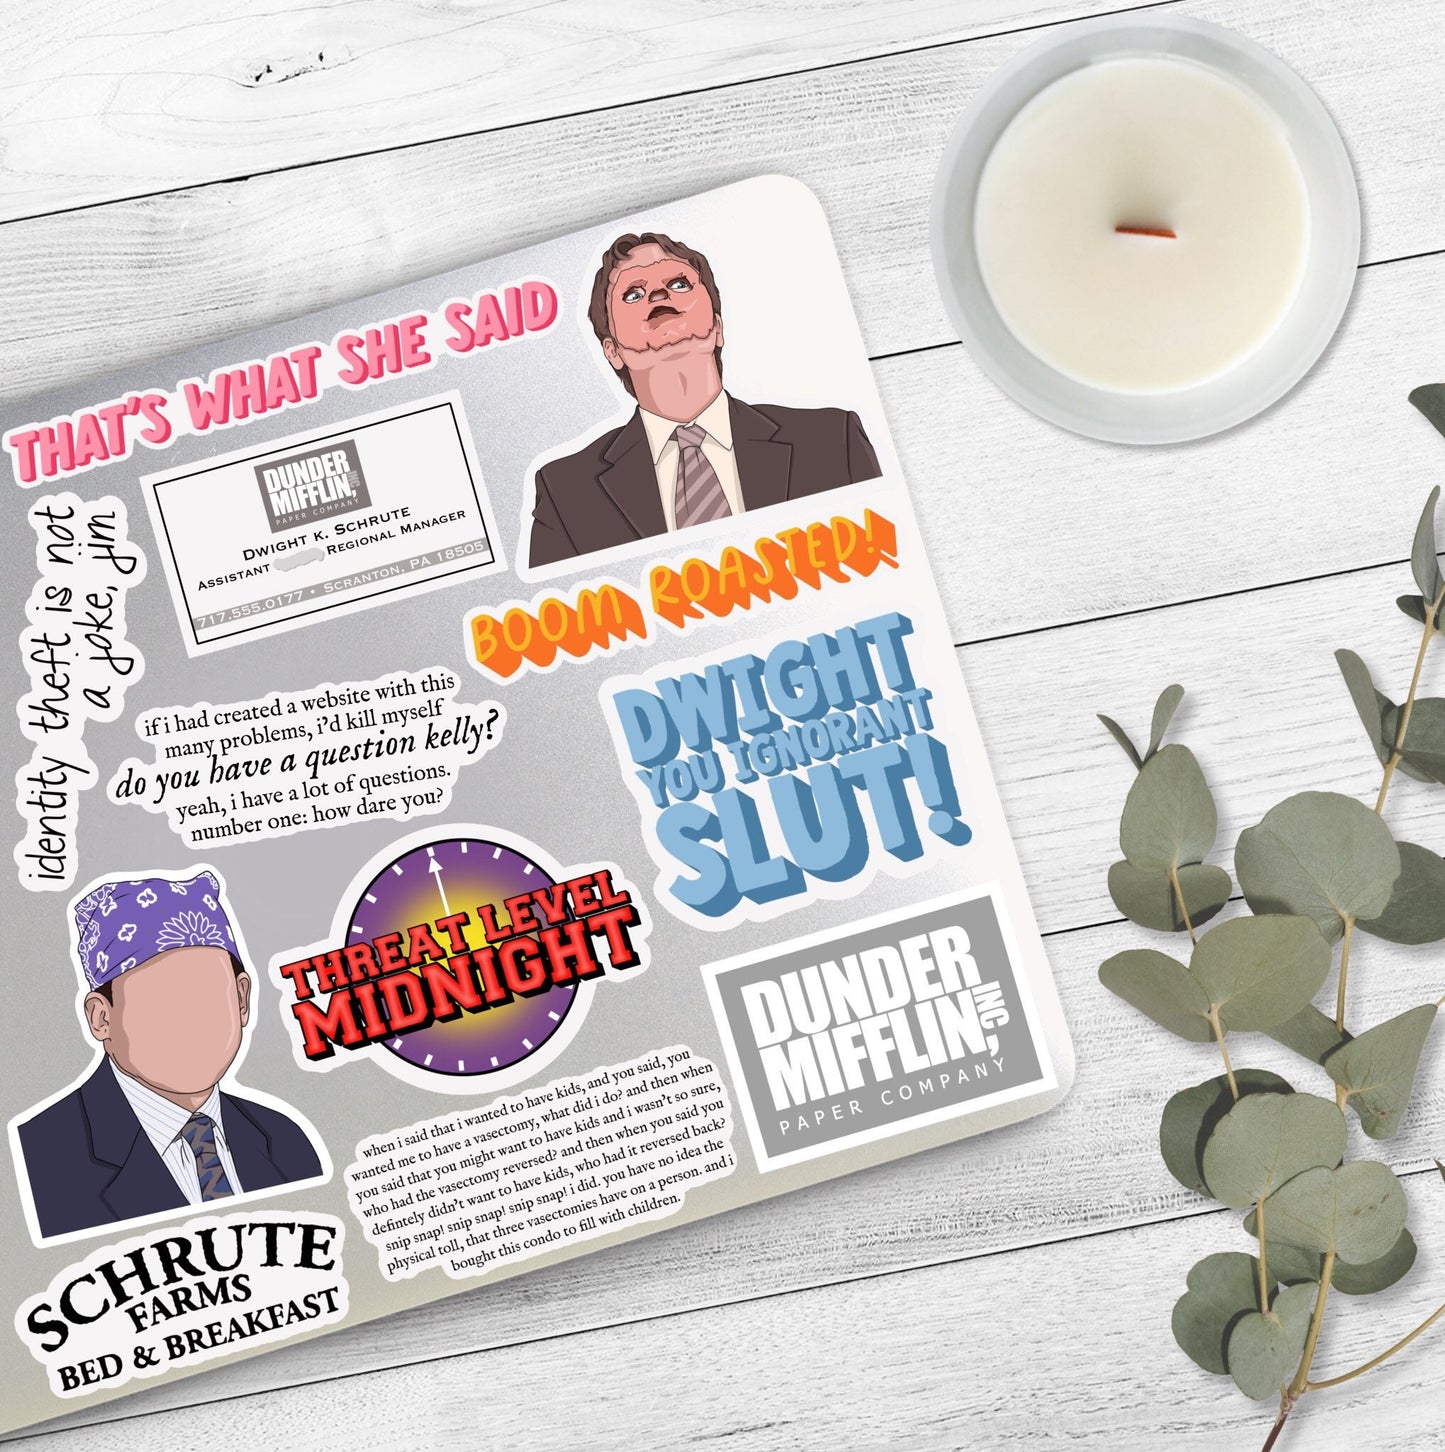 Schrute Farms Bed & Breakfast | Office Stickers